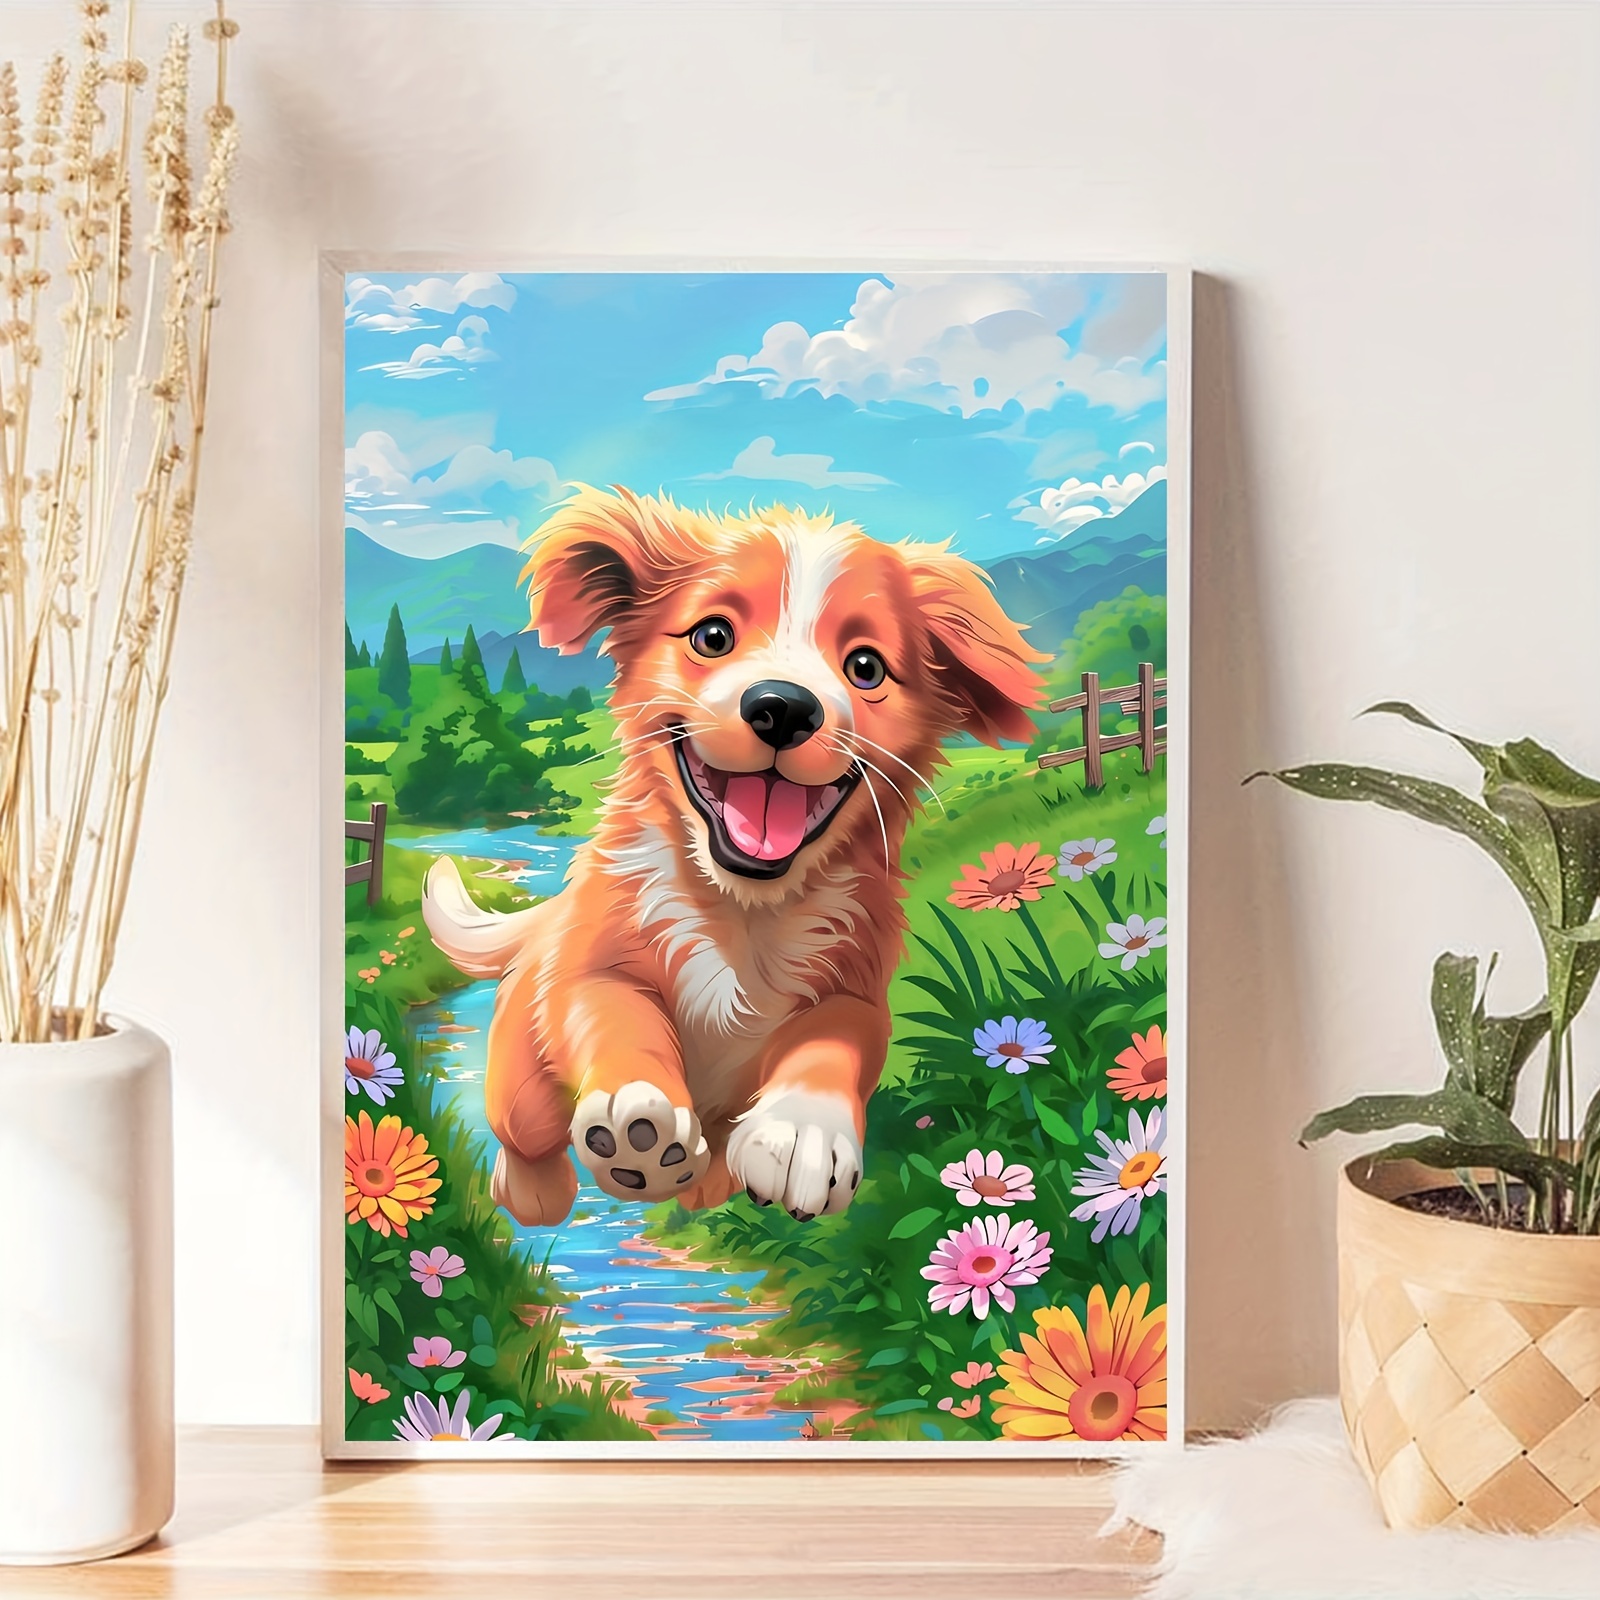 Diamond Painting Kits For Adults Diamond Art Kits For Adults Cartoon Gem  Art Kits For Adults For Gift Home Wall Decor 11.8x15.7 Inches